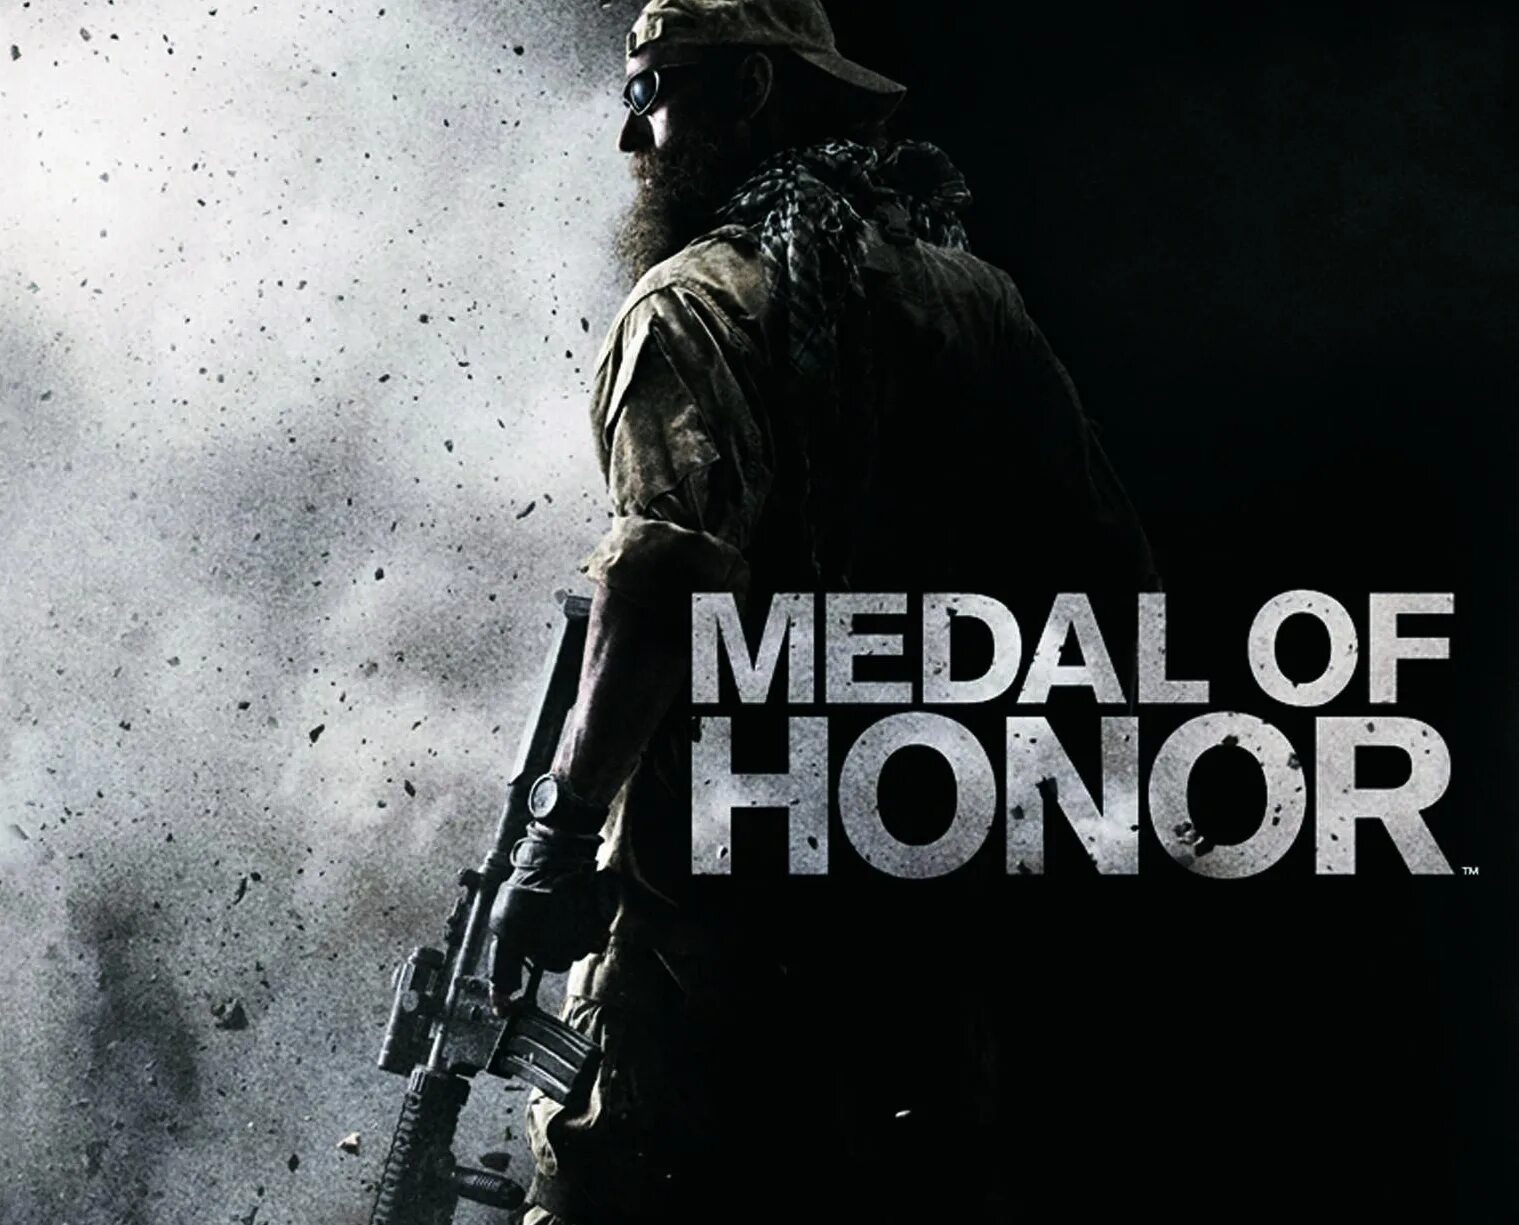 Medal of honor 360. Medal of Honor Limited Edition 2010. Медаль оф хонор 2010. Medal of Honor Xbox 360. Medal of Honor 2010 обложка.